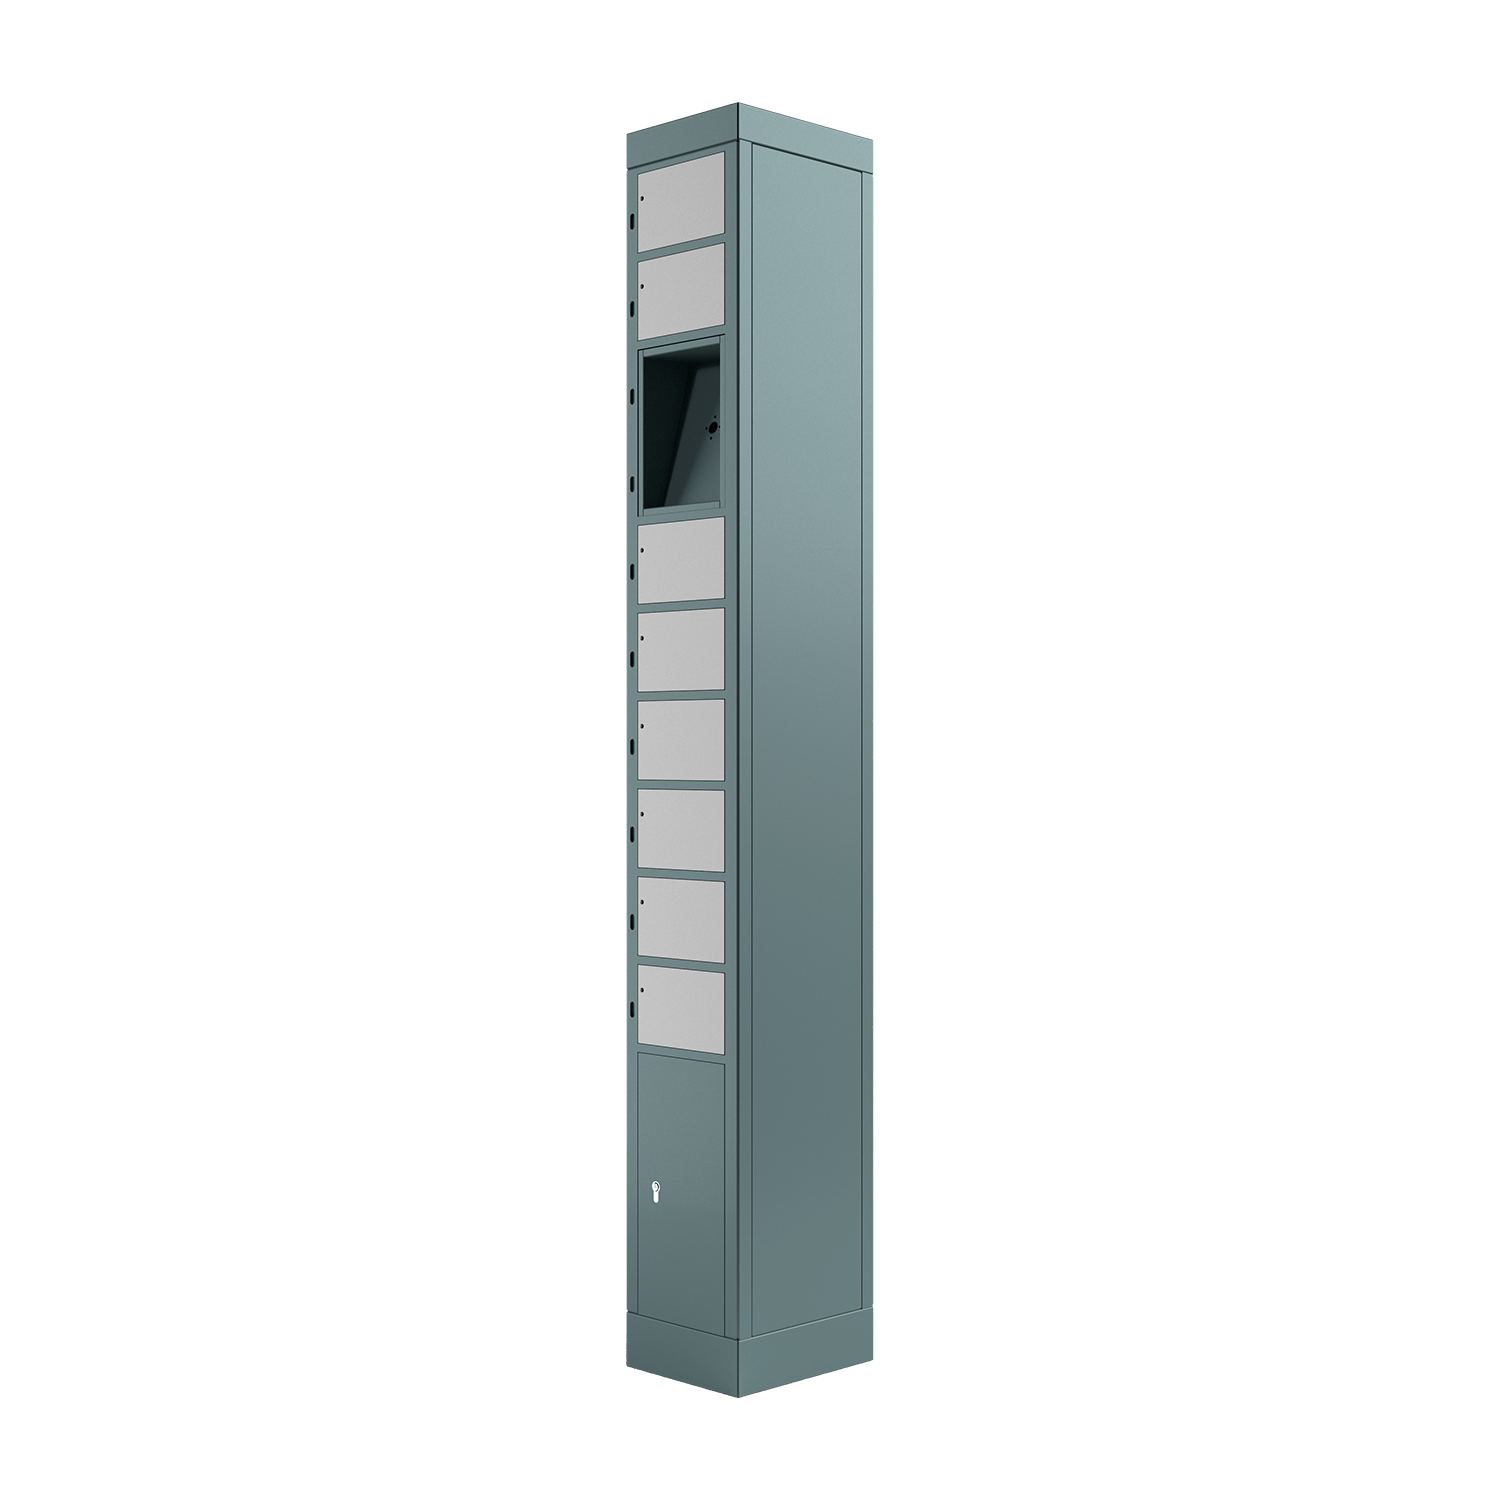 locker compartment system, size S, with 8 compartments, space for user terminal, right view